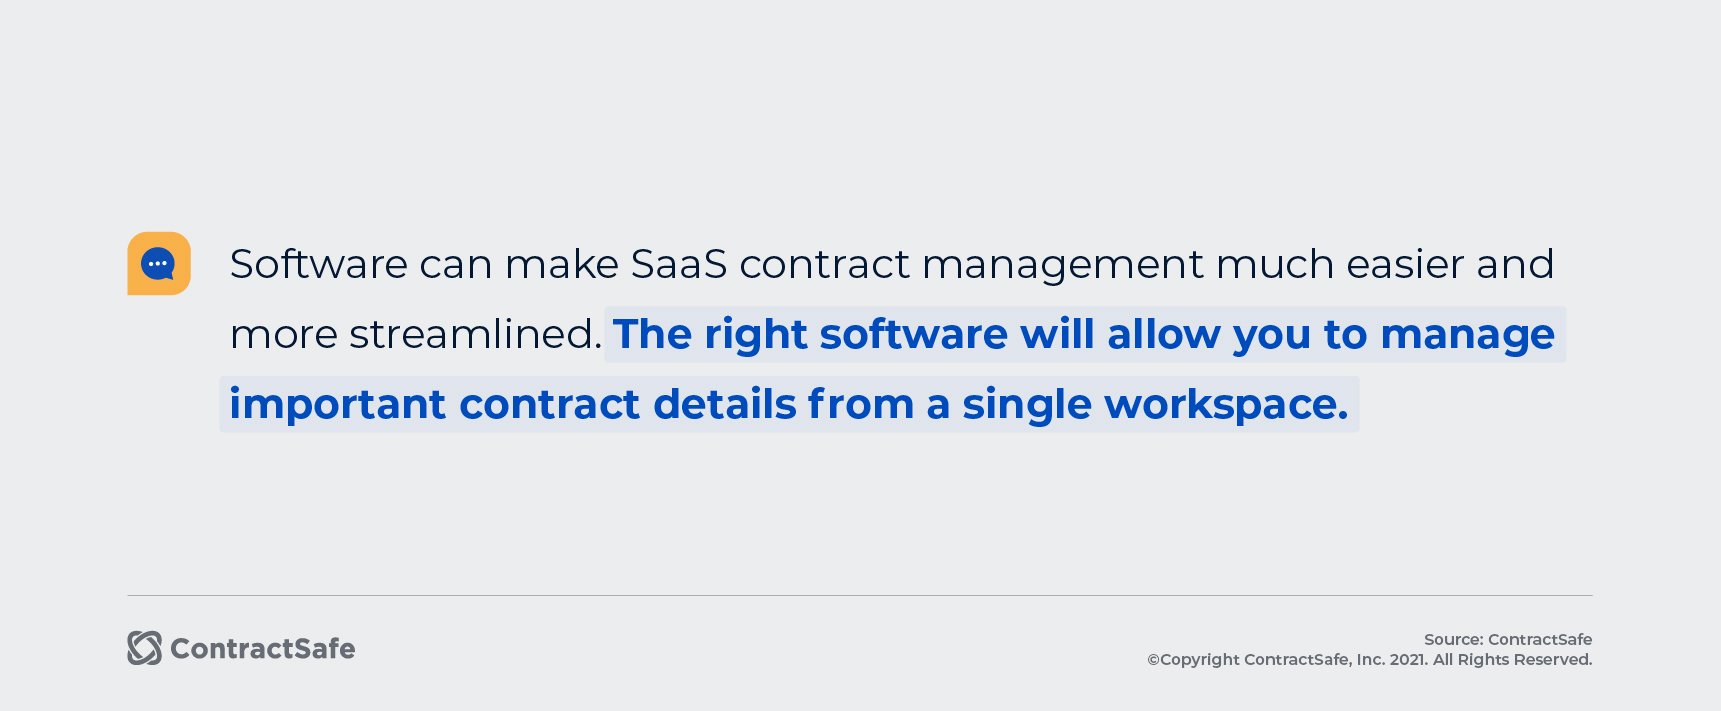 Software can make SaaS contract management much easier and more streamlined. The right software will allow you to manage important contract details from a single workspace.